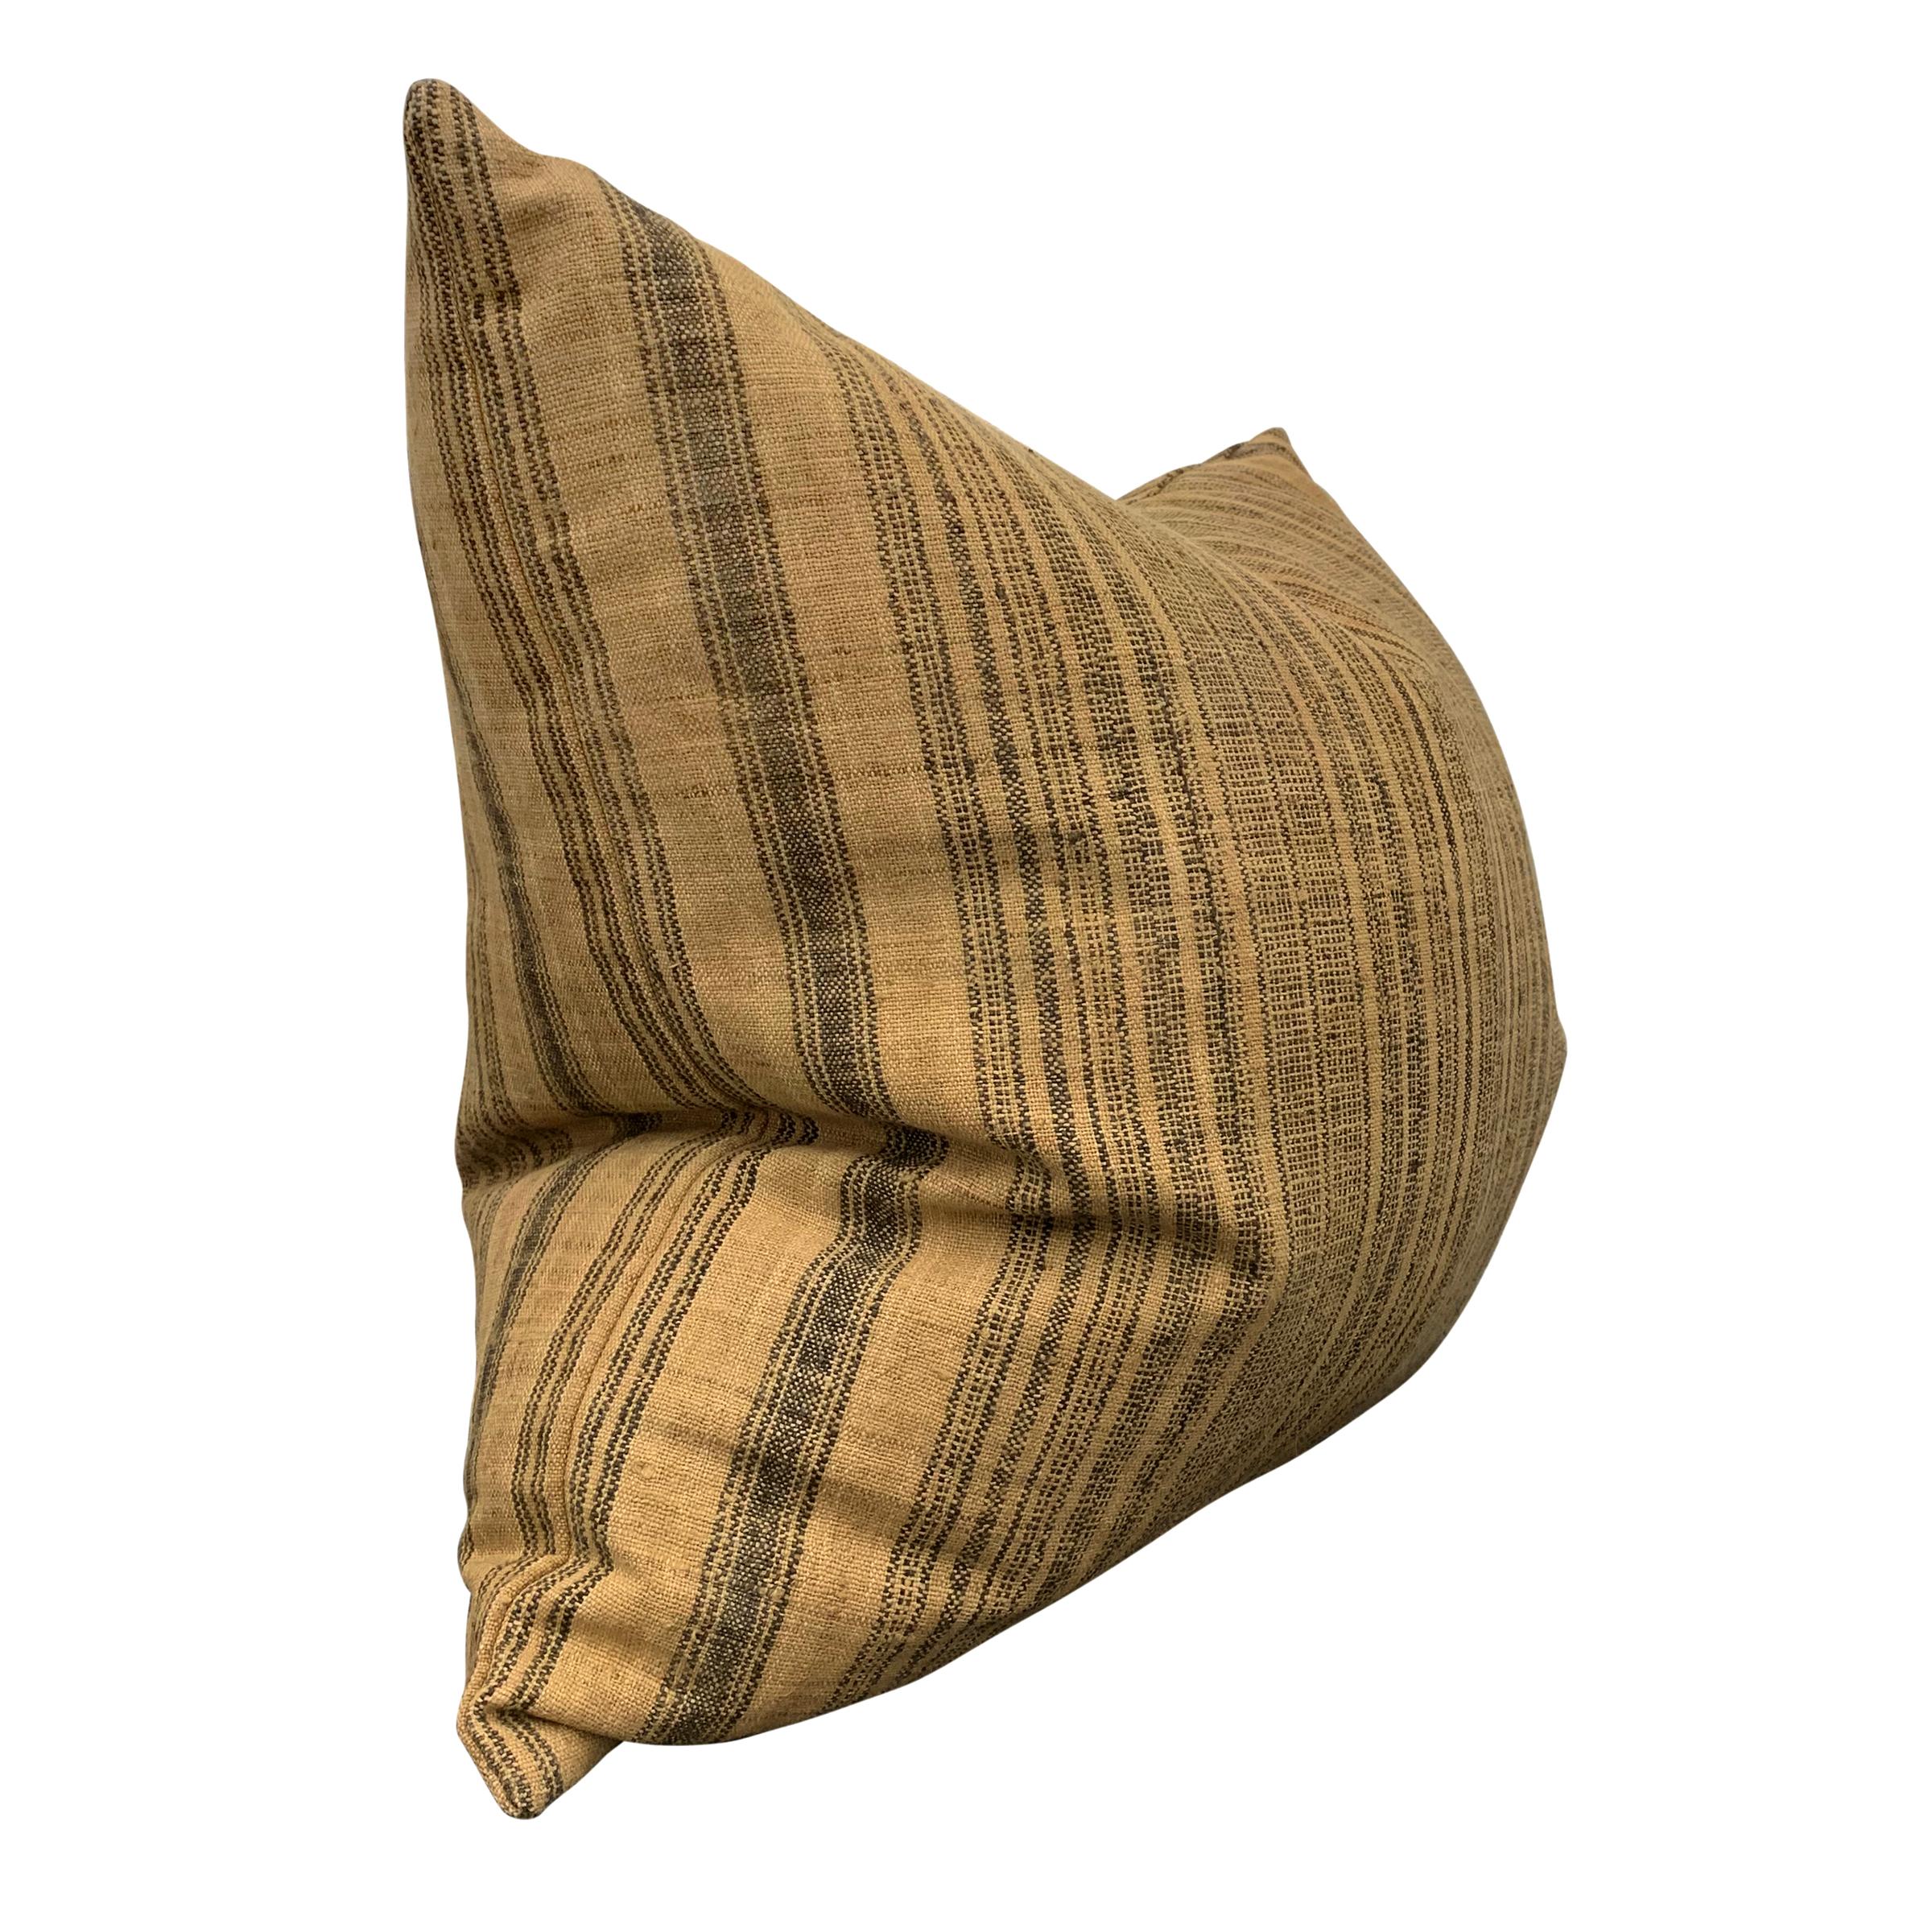 Pair of Early 20th Century Thai Hill Tribe Striped Linen Pillows (Rustikal)